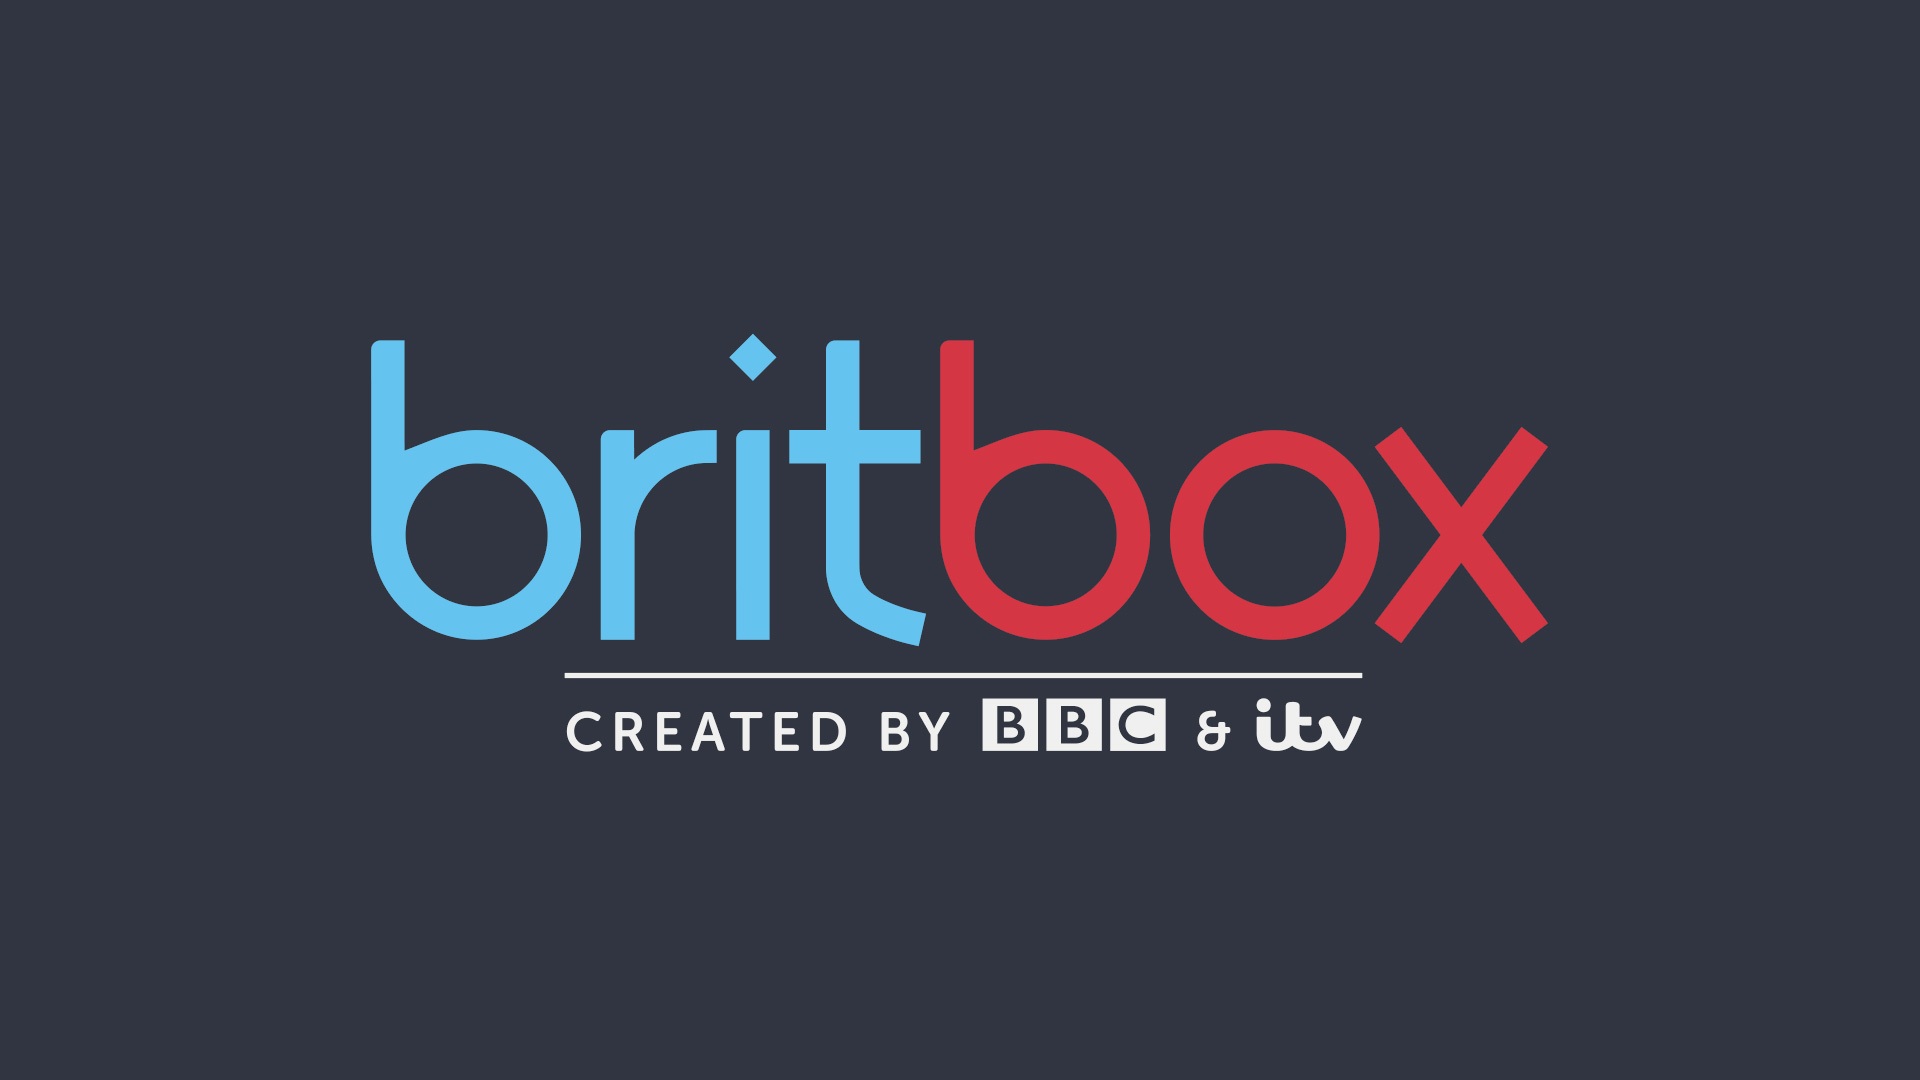 Deal Alert! Save 20% on One Year of BritBox to Watch The Best of The BBC & ITV Programming